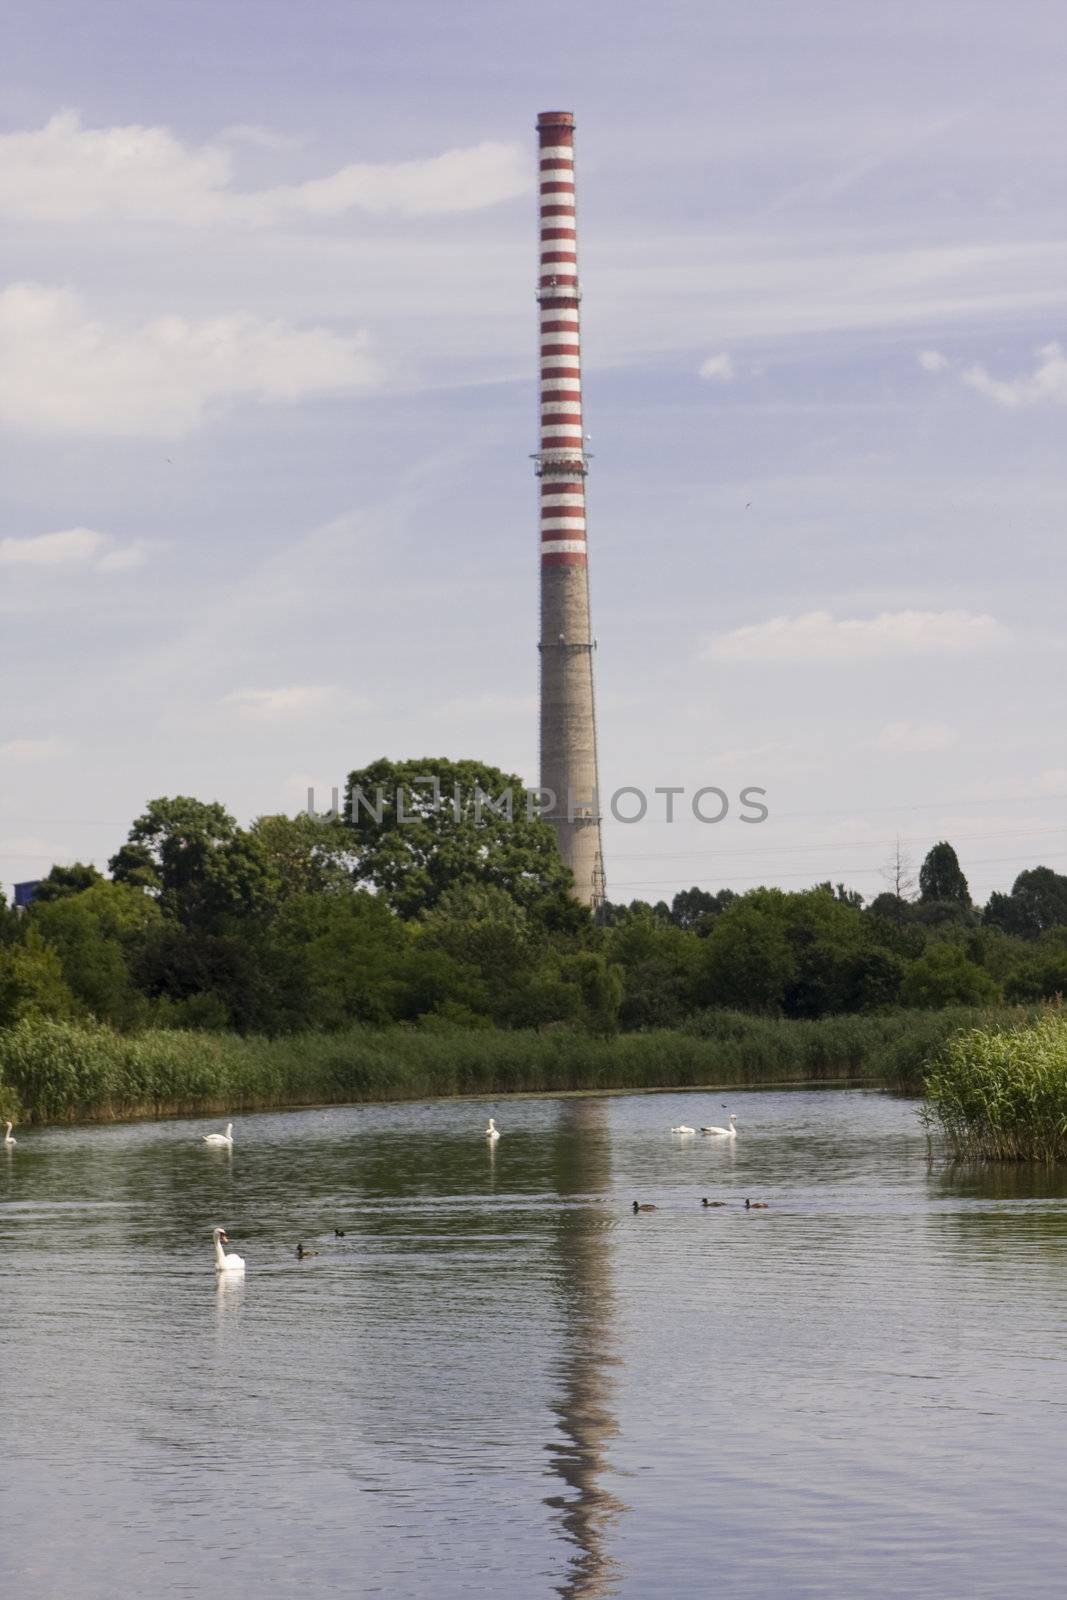 lake and an old chimney - save the environment